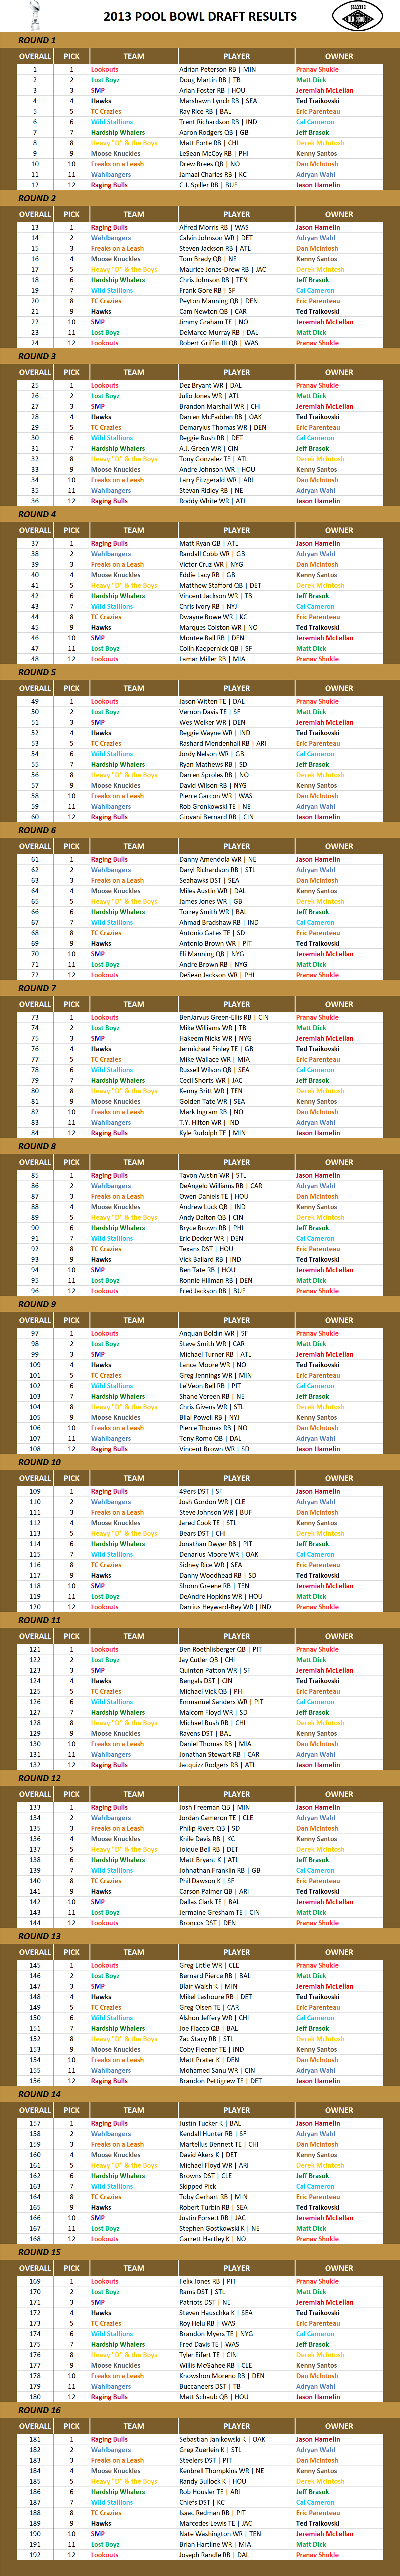 2013 National Football League Pool Draft Results